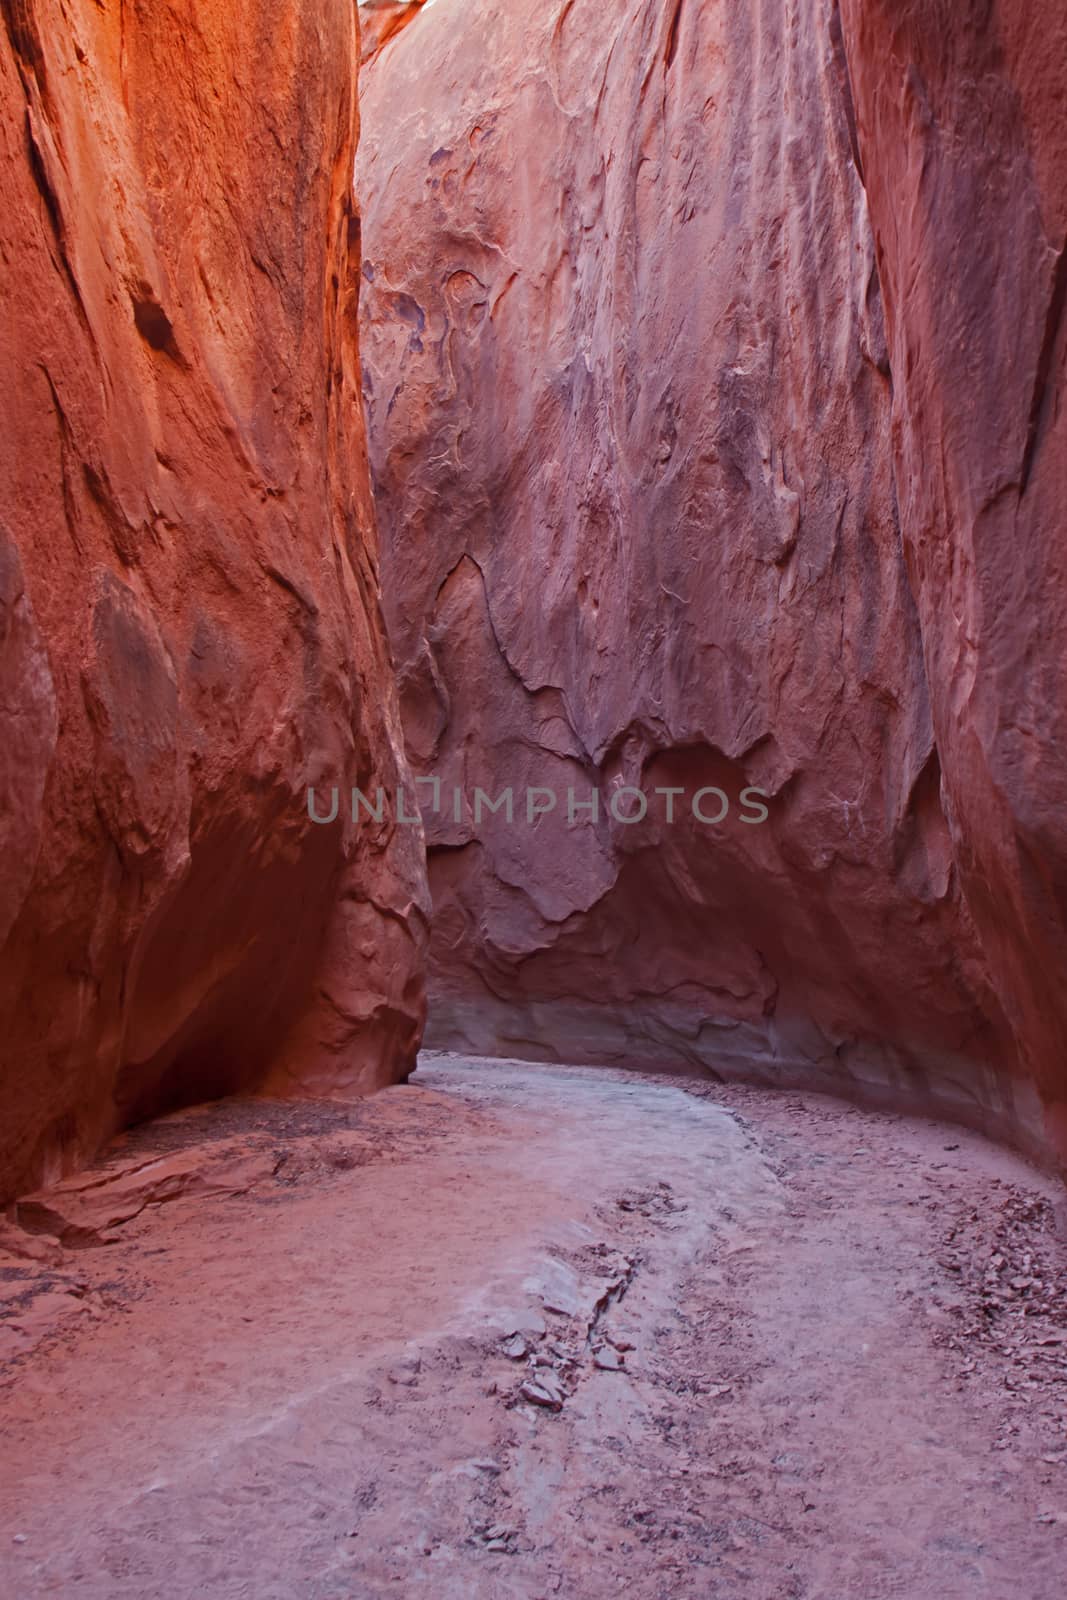 The Dryfork slot canyon is one of several slot canyons in the vicinity of Escalante. UT.